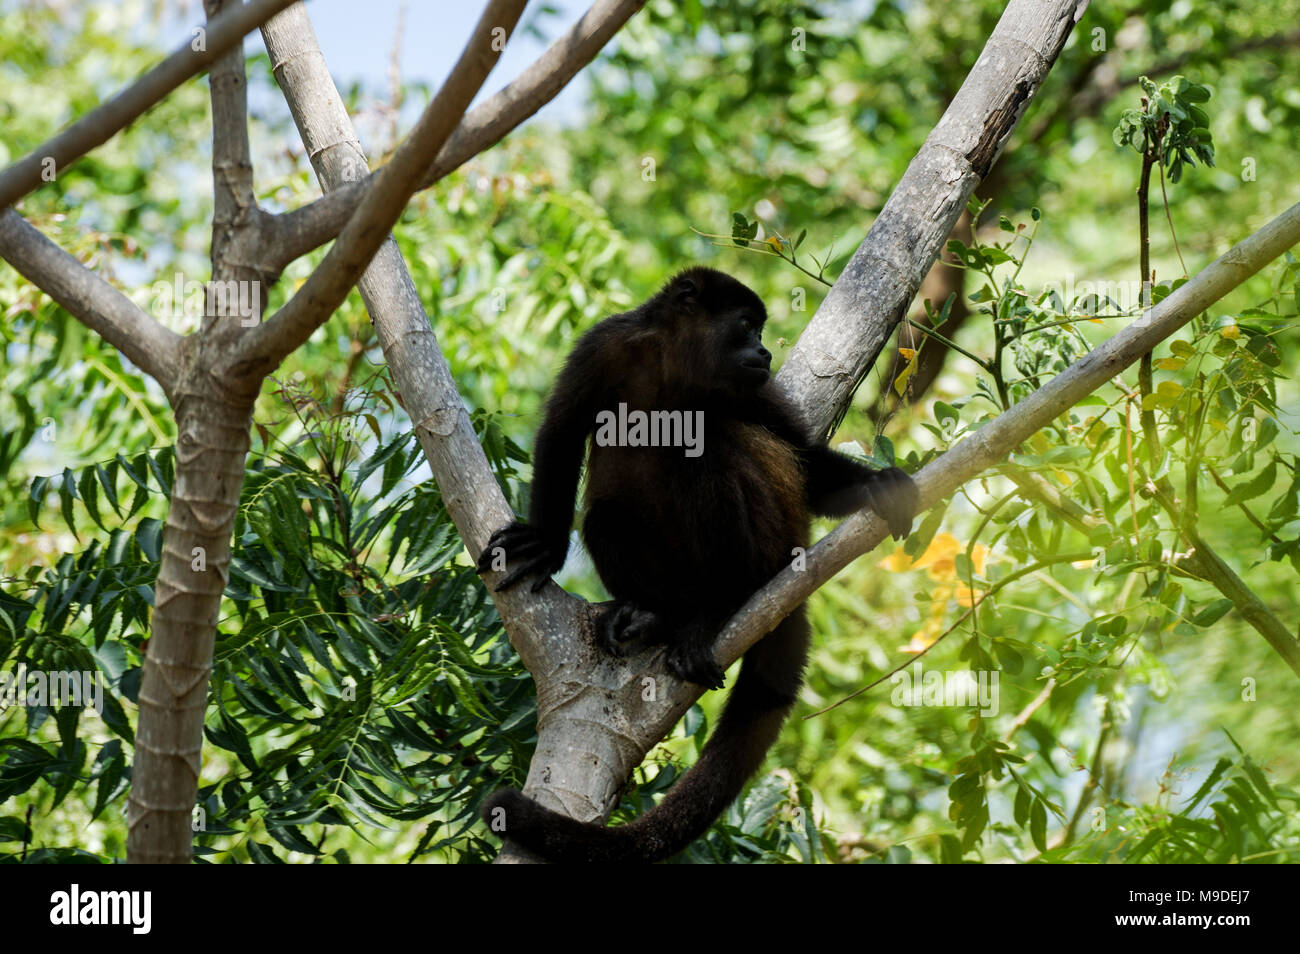 Howling monkey in Charco Verde nature reserve on Ometepe Island - Nicaragua, Central America Stock Photo